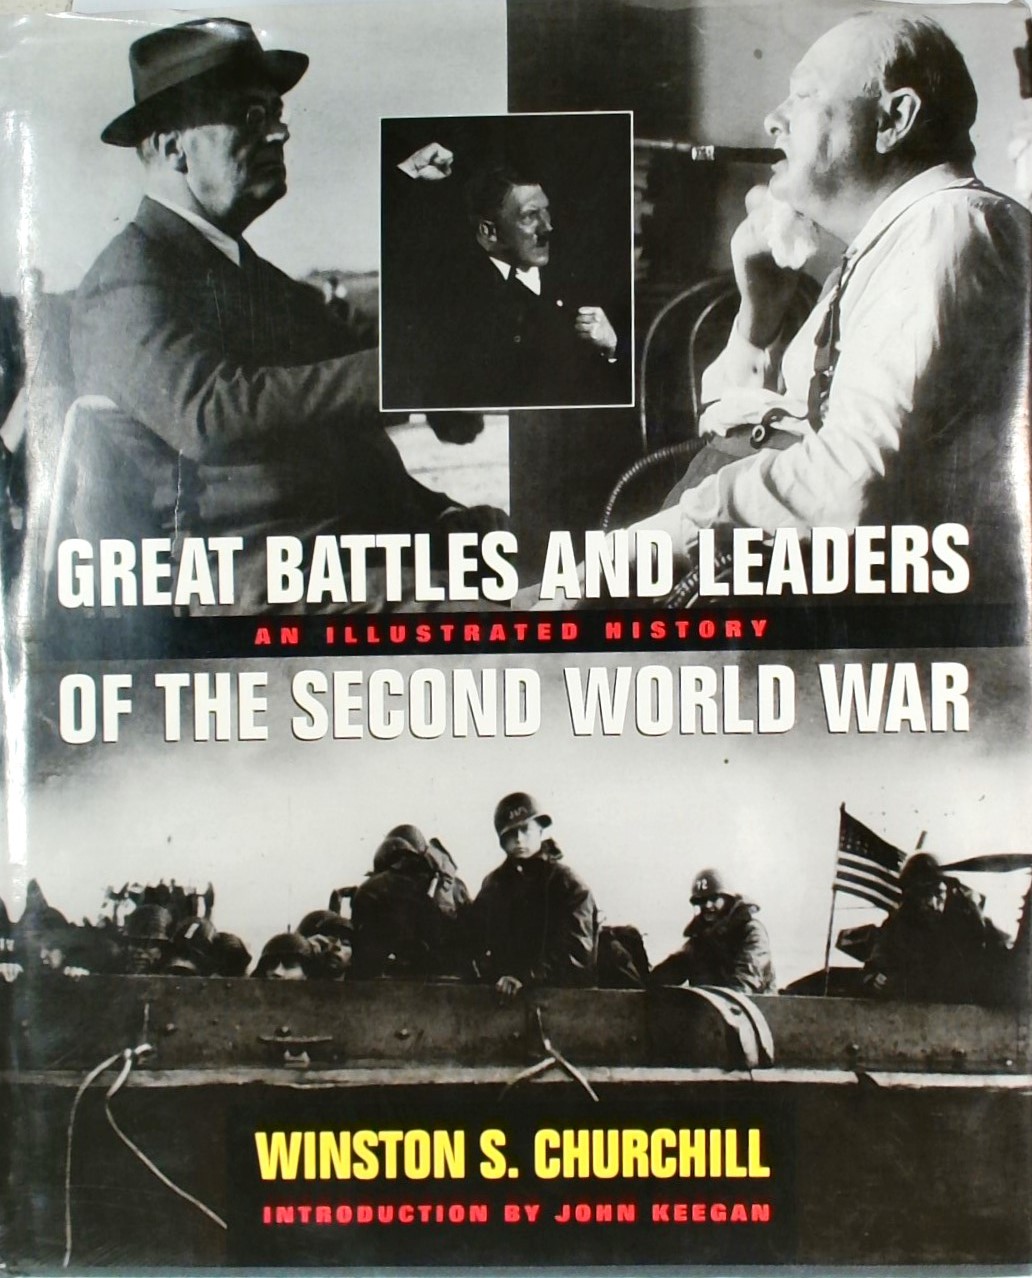 GREAT BATTLES AND LEADERS OF THE SECOND WORLD WAR